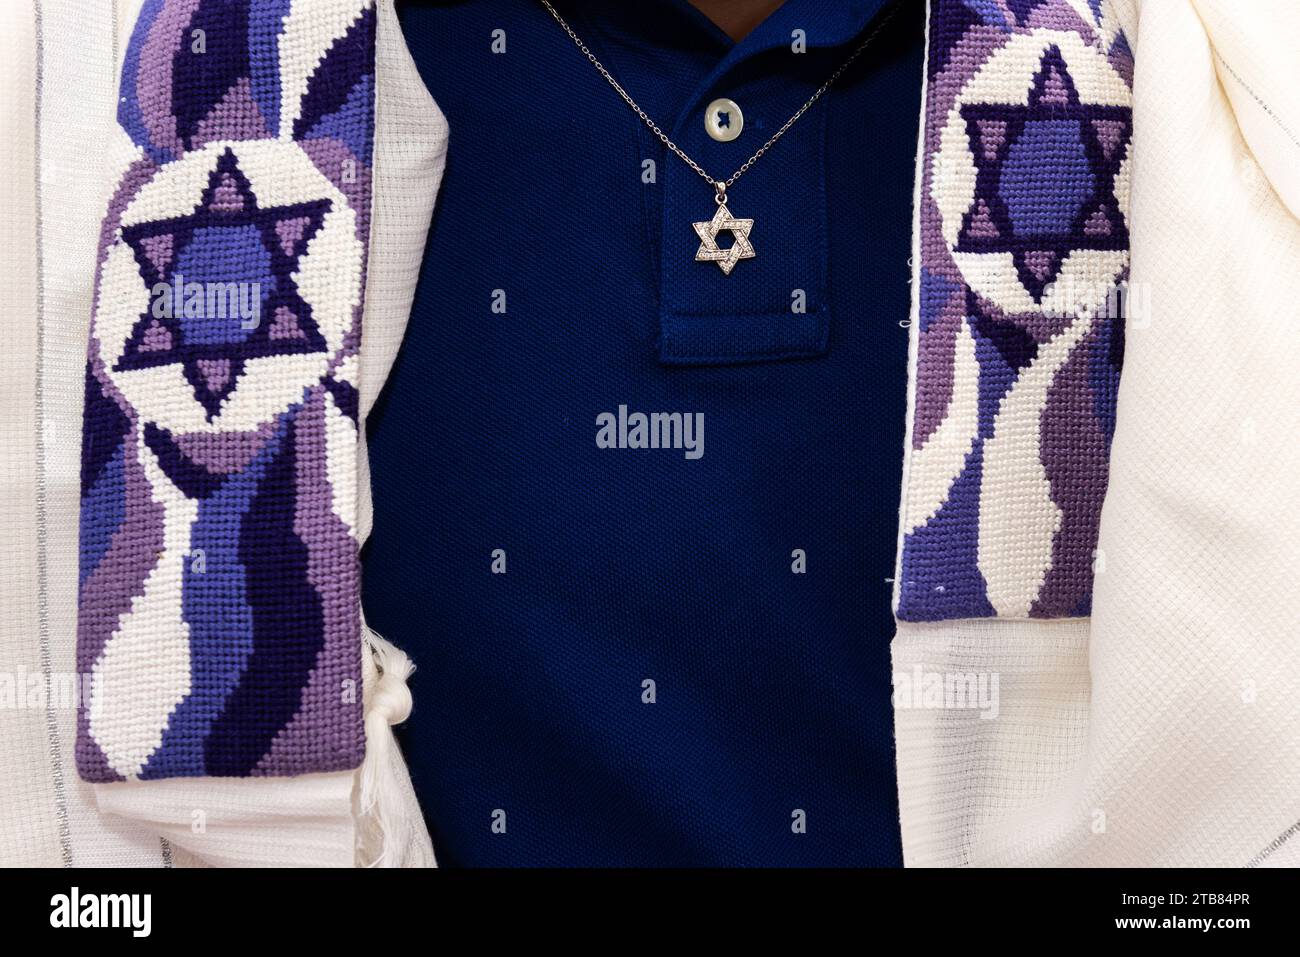 Detail of a Jewish man wearing a tallit or prayer shawl decorated with Jewish stars and a necklace with a gold Magen David pendant. Stock Photo